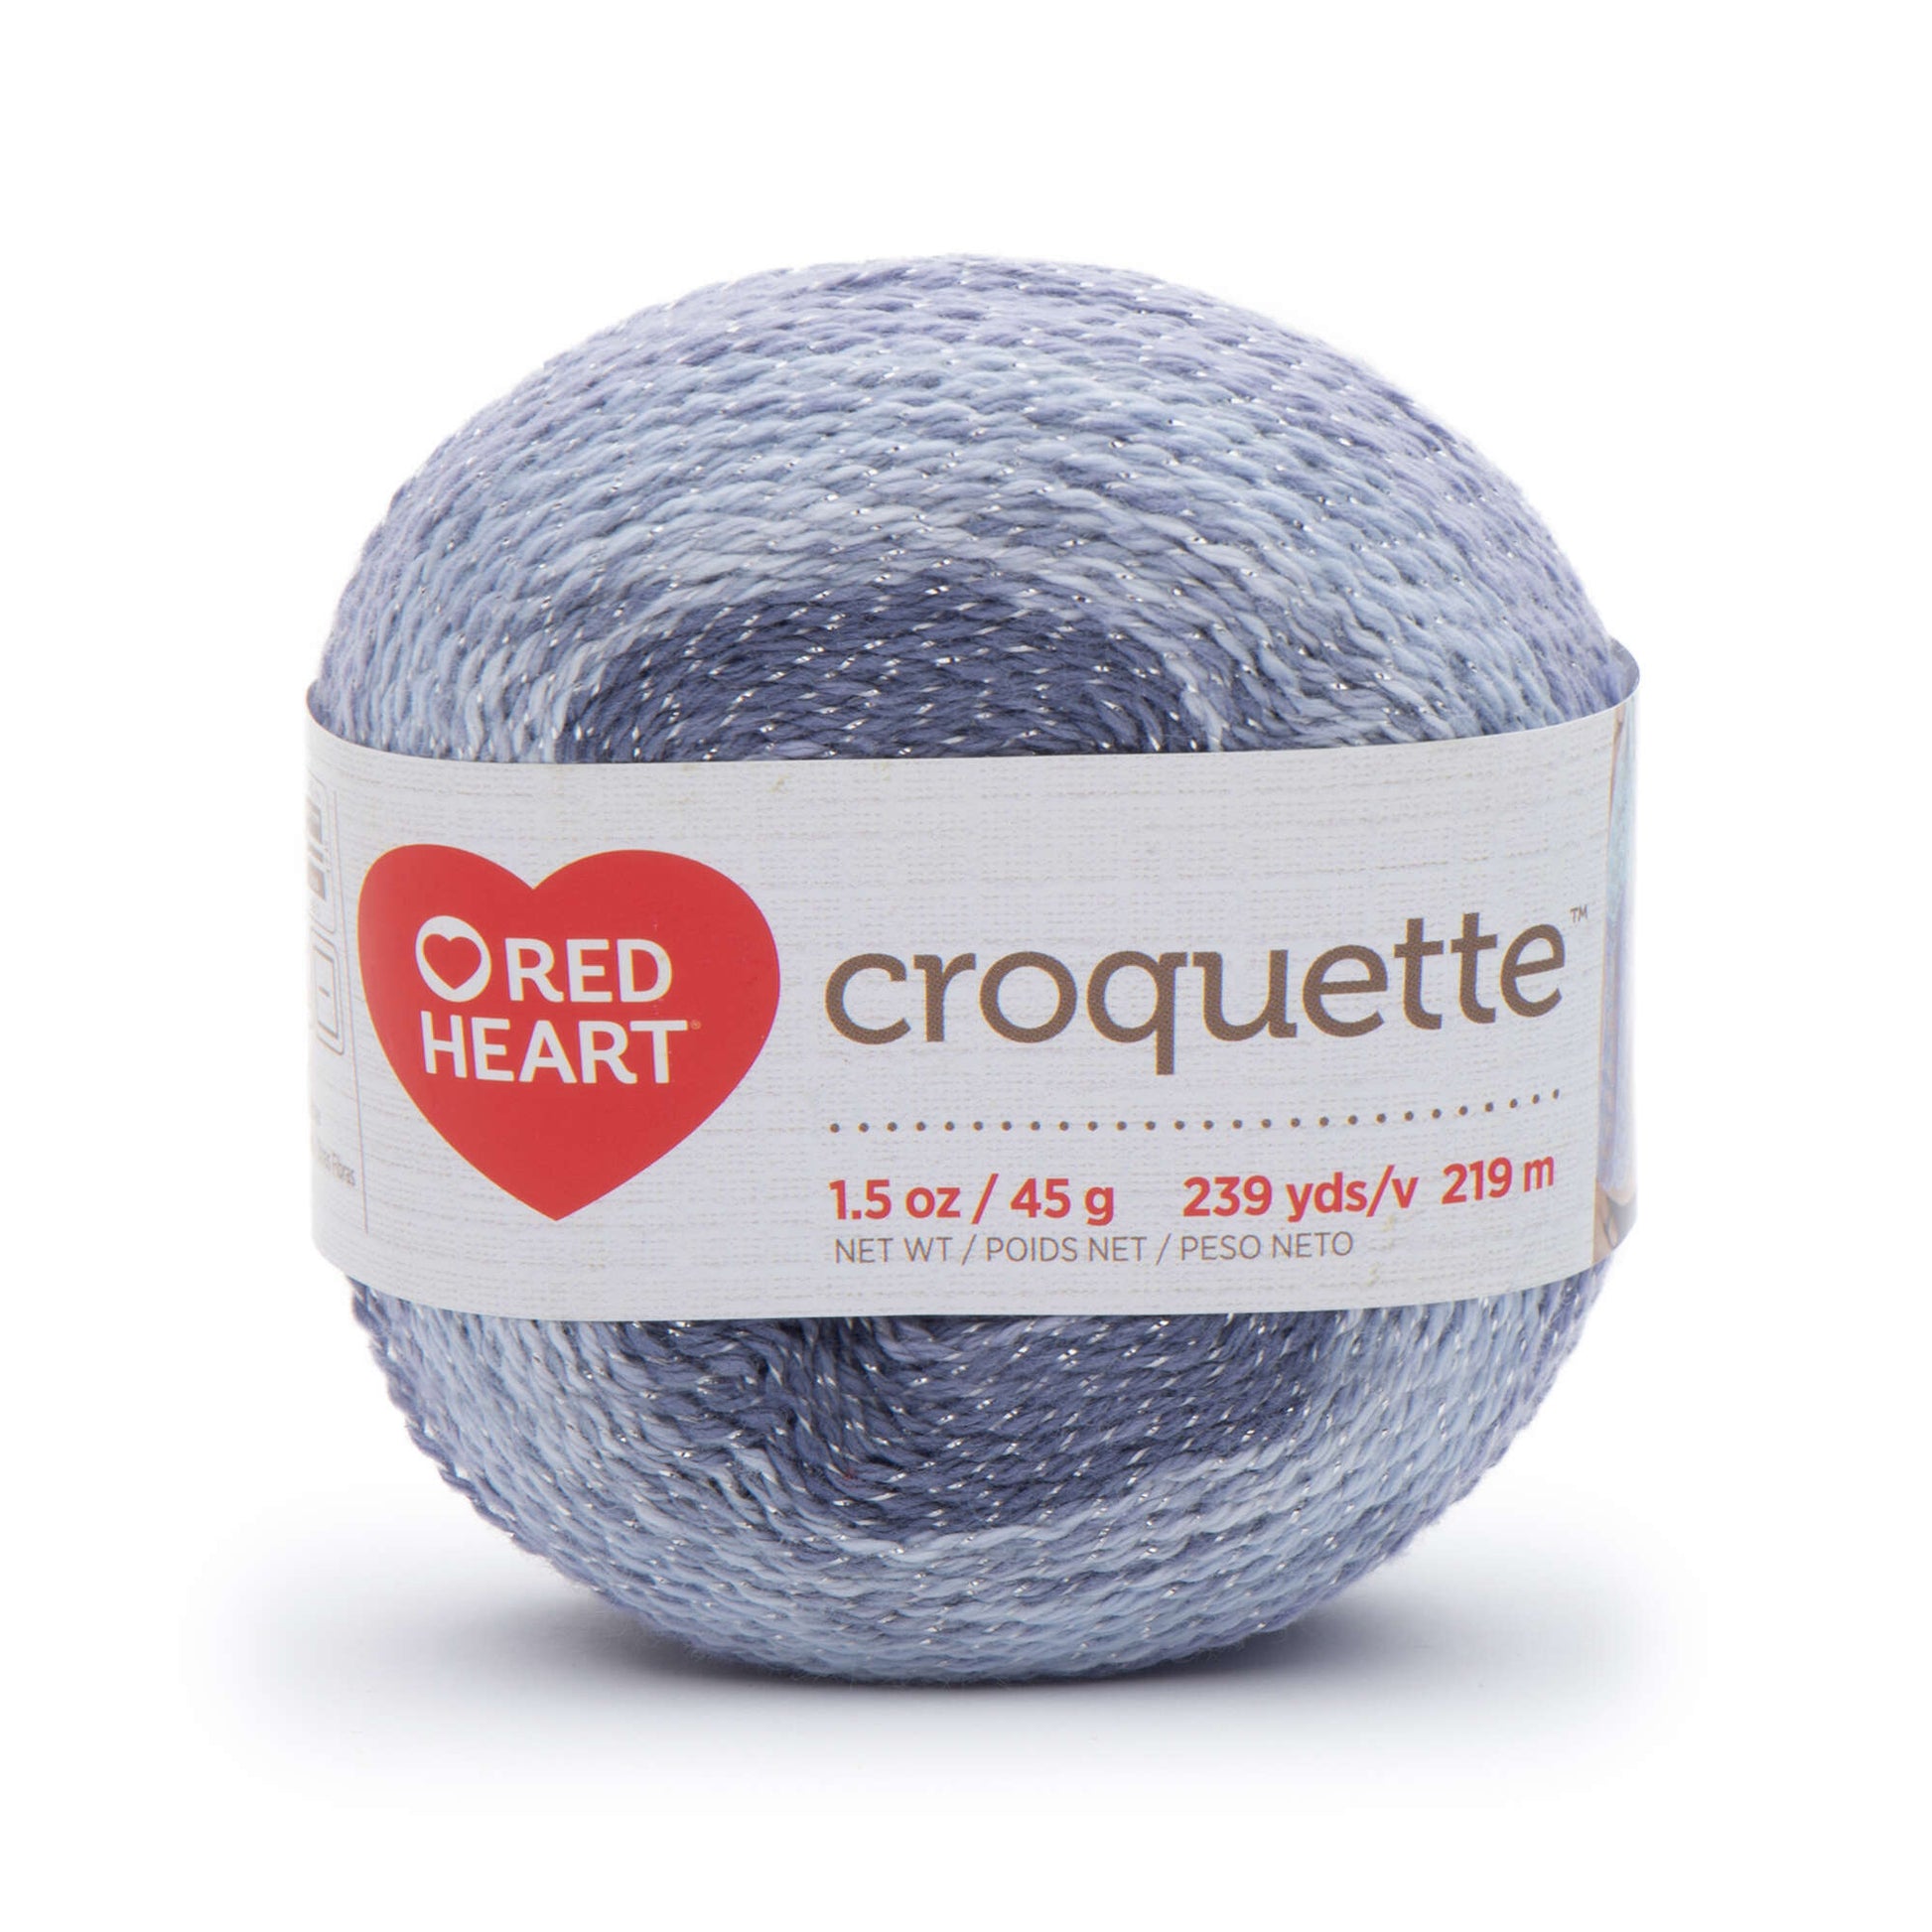 Red Heart Croquette Yarn - Clearance shades